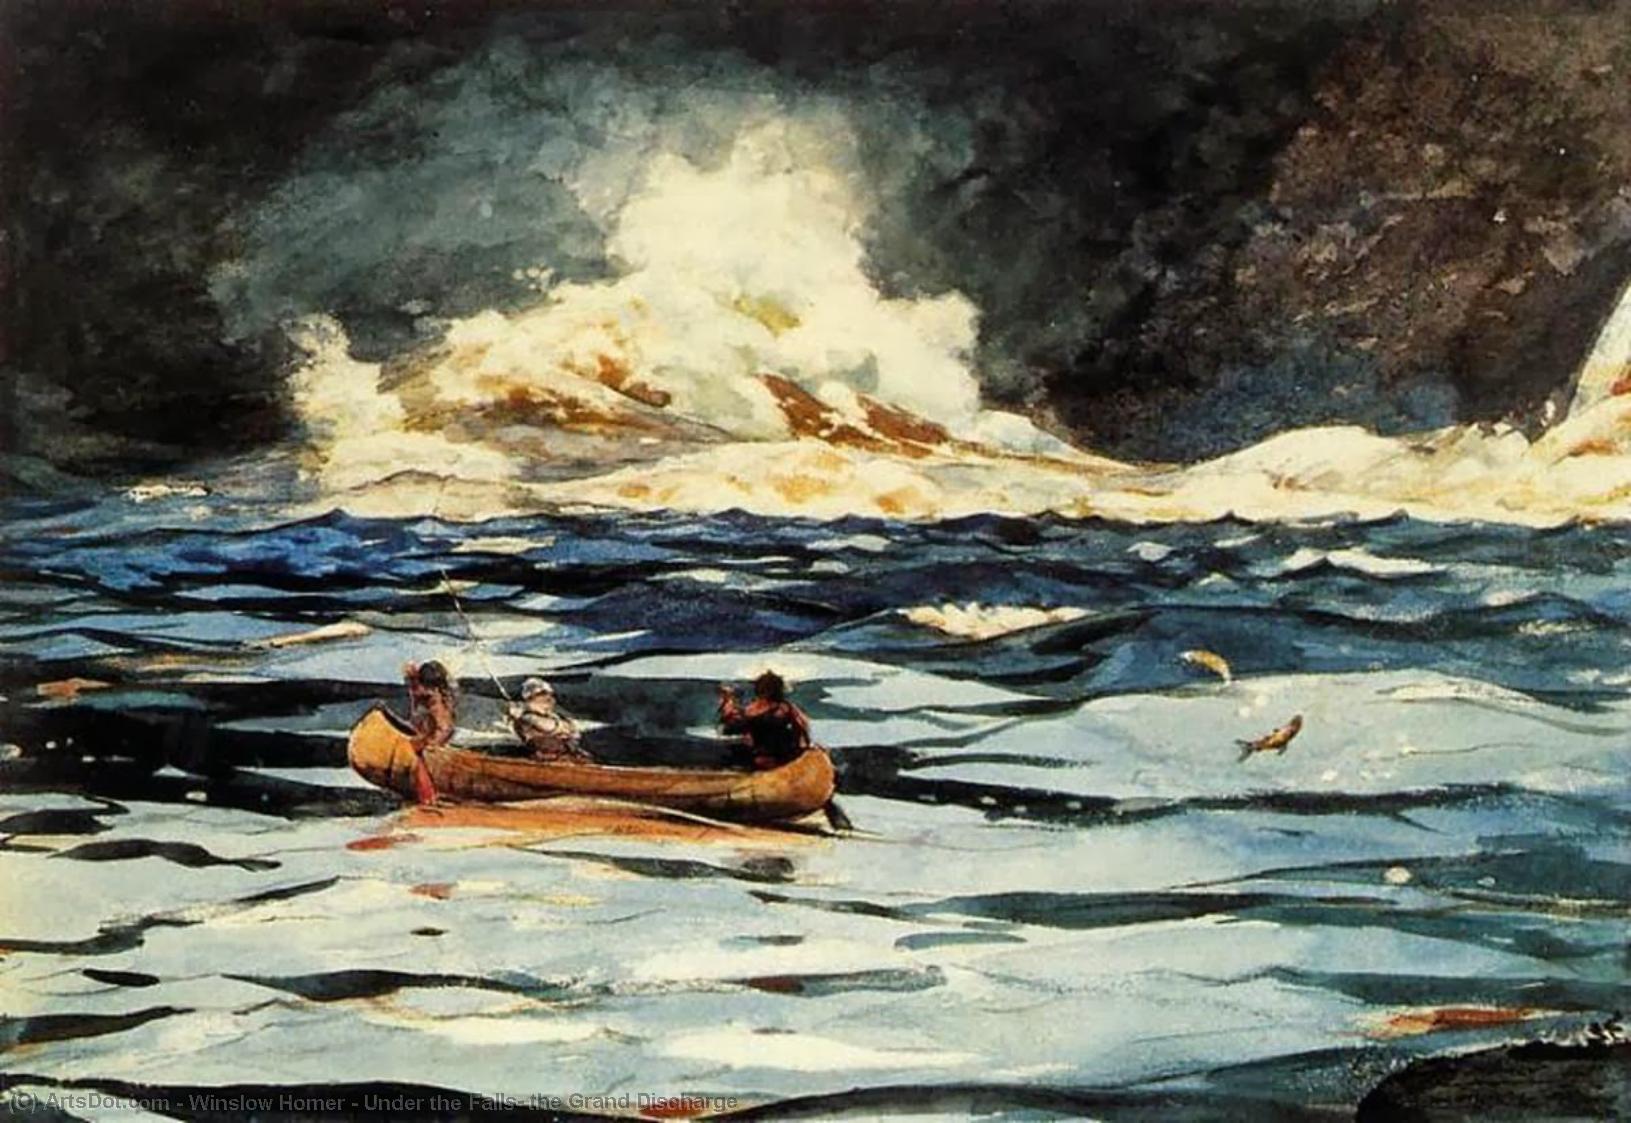 WikiOO.org - Encyclopedia of Fine Arts - Maalaus, taideteos Winslow Homer - Under the Falls, the Grand Discharge